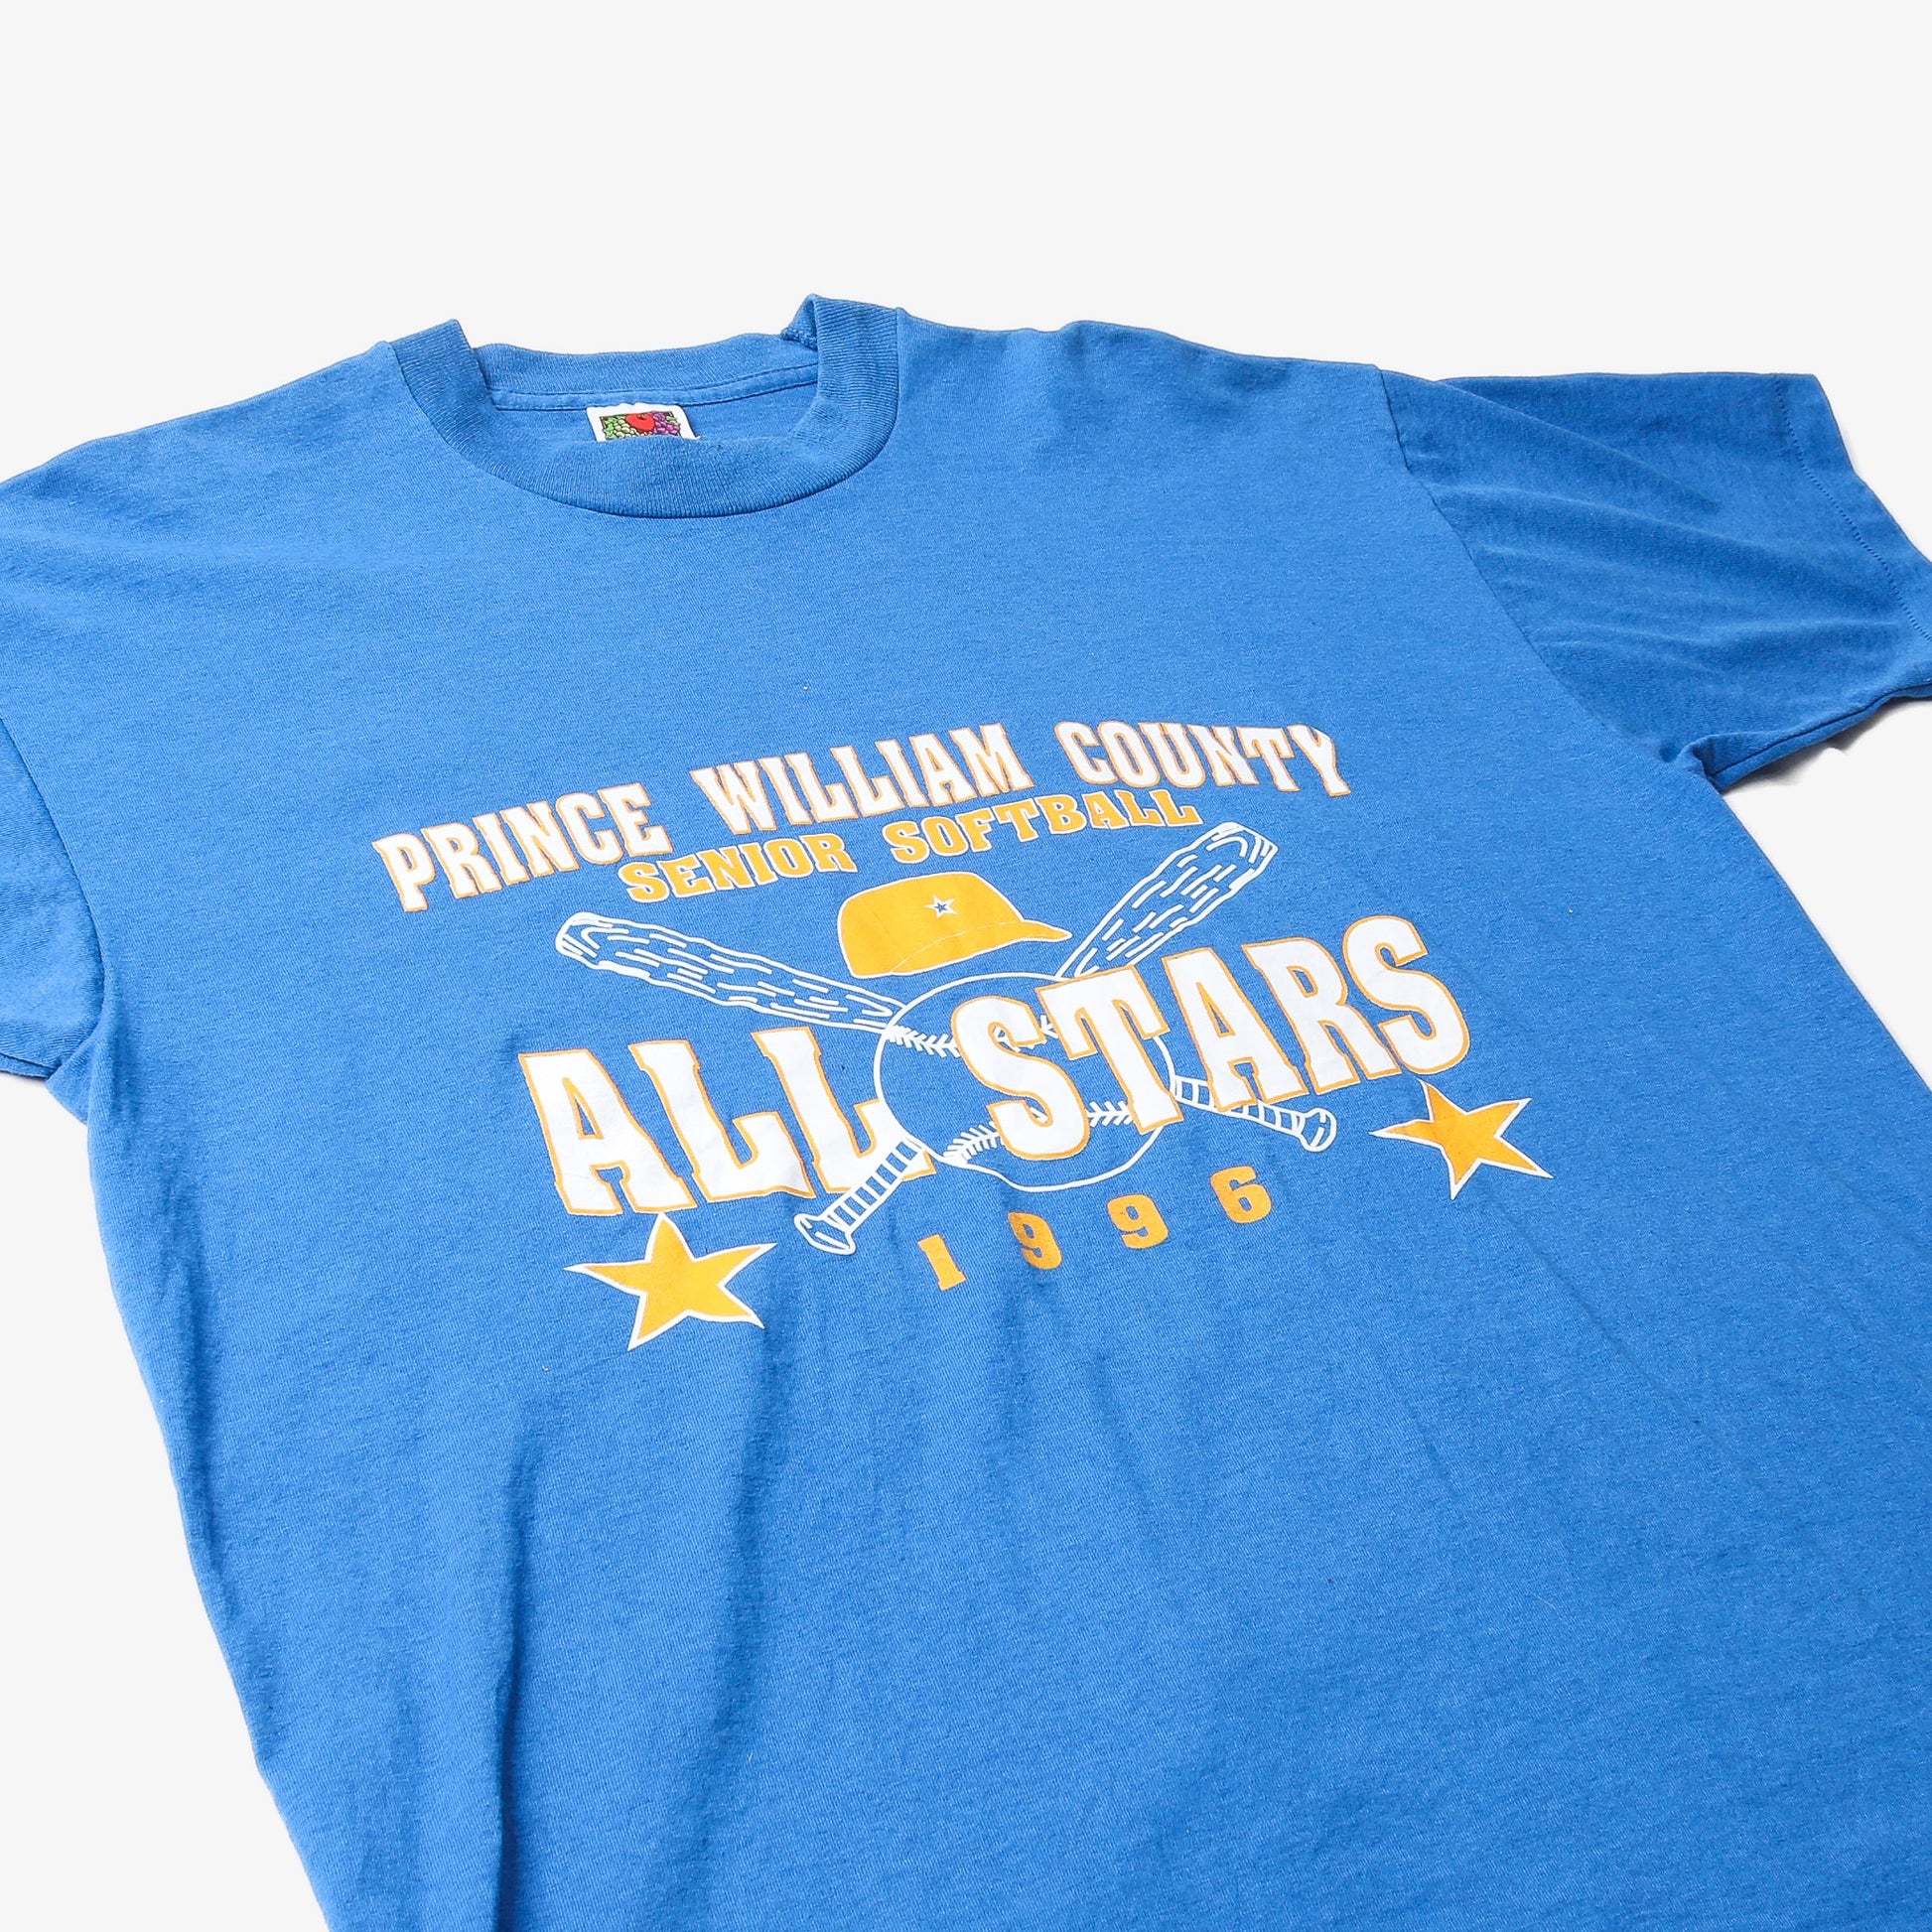 Vintage 'All Stars' T-Shirt - American Madness